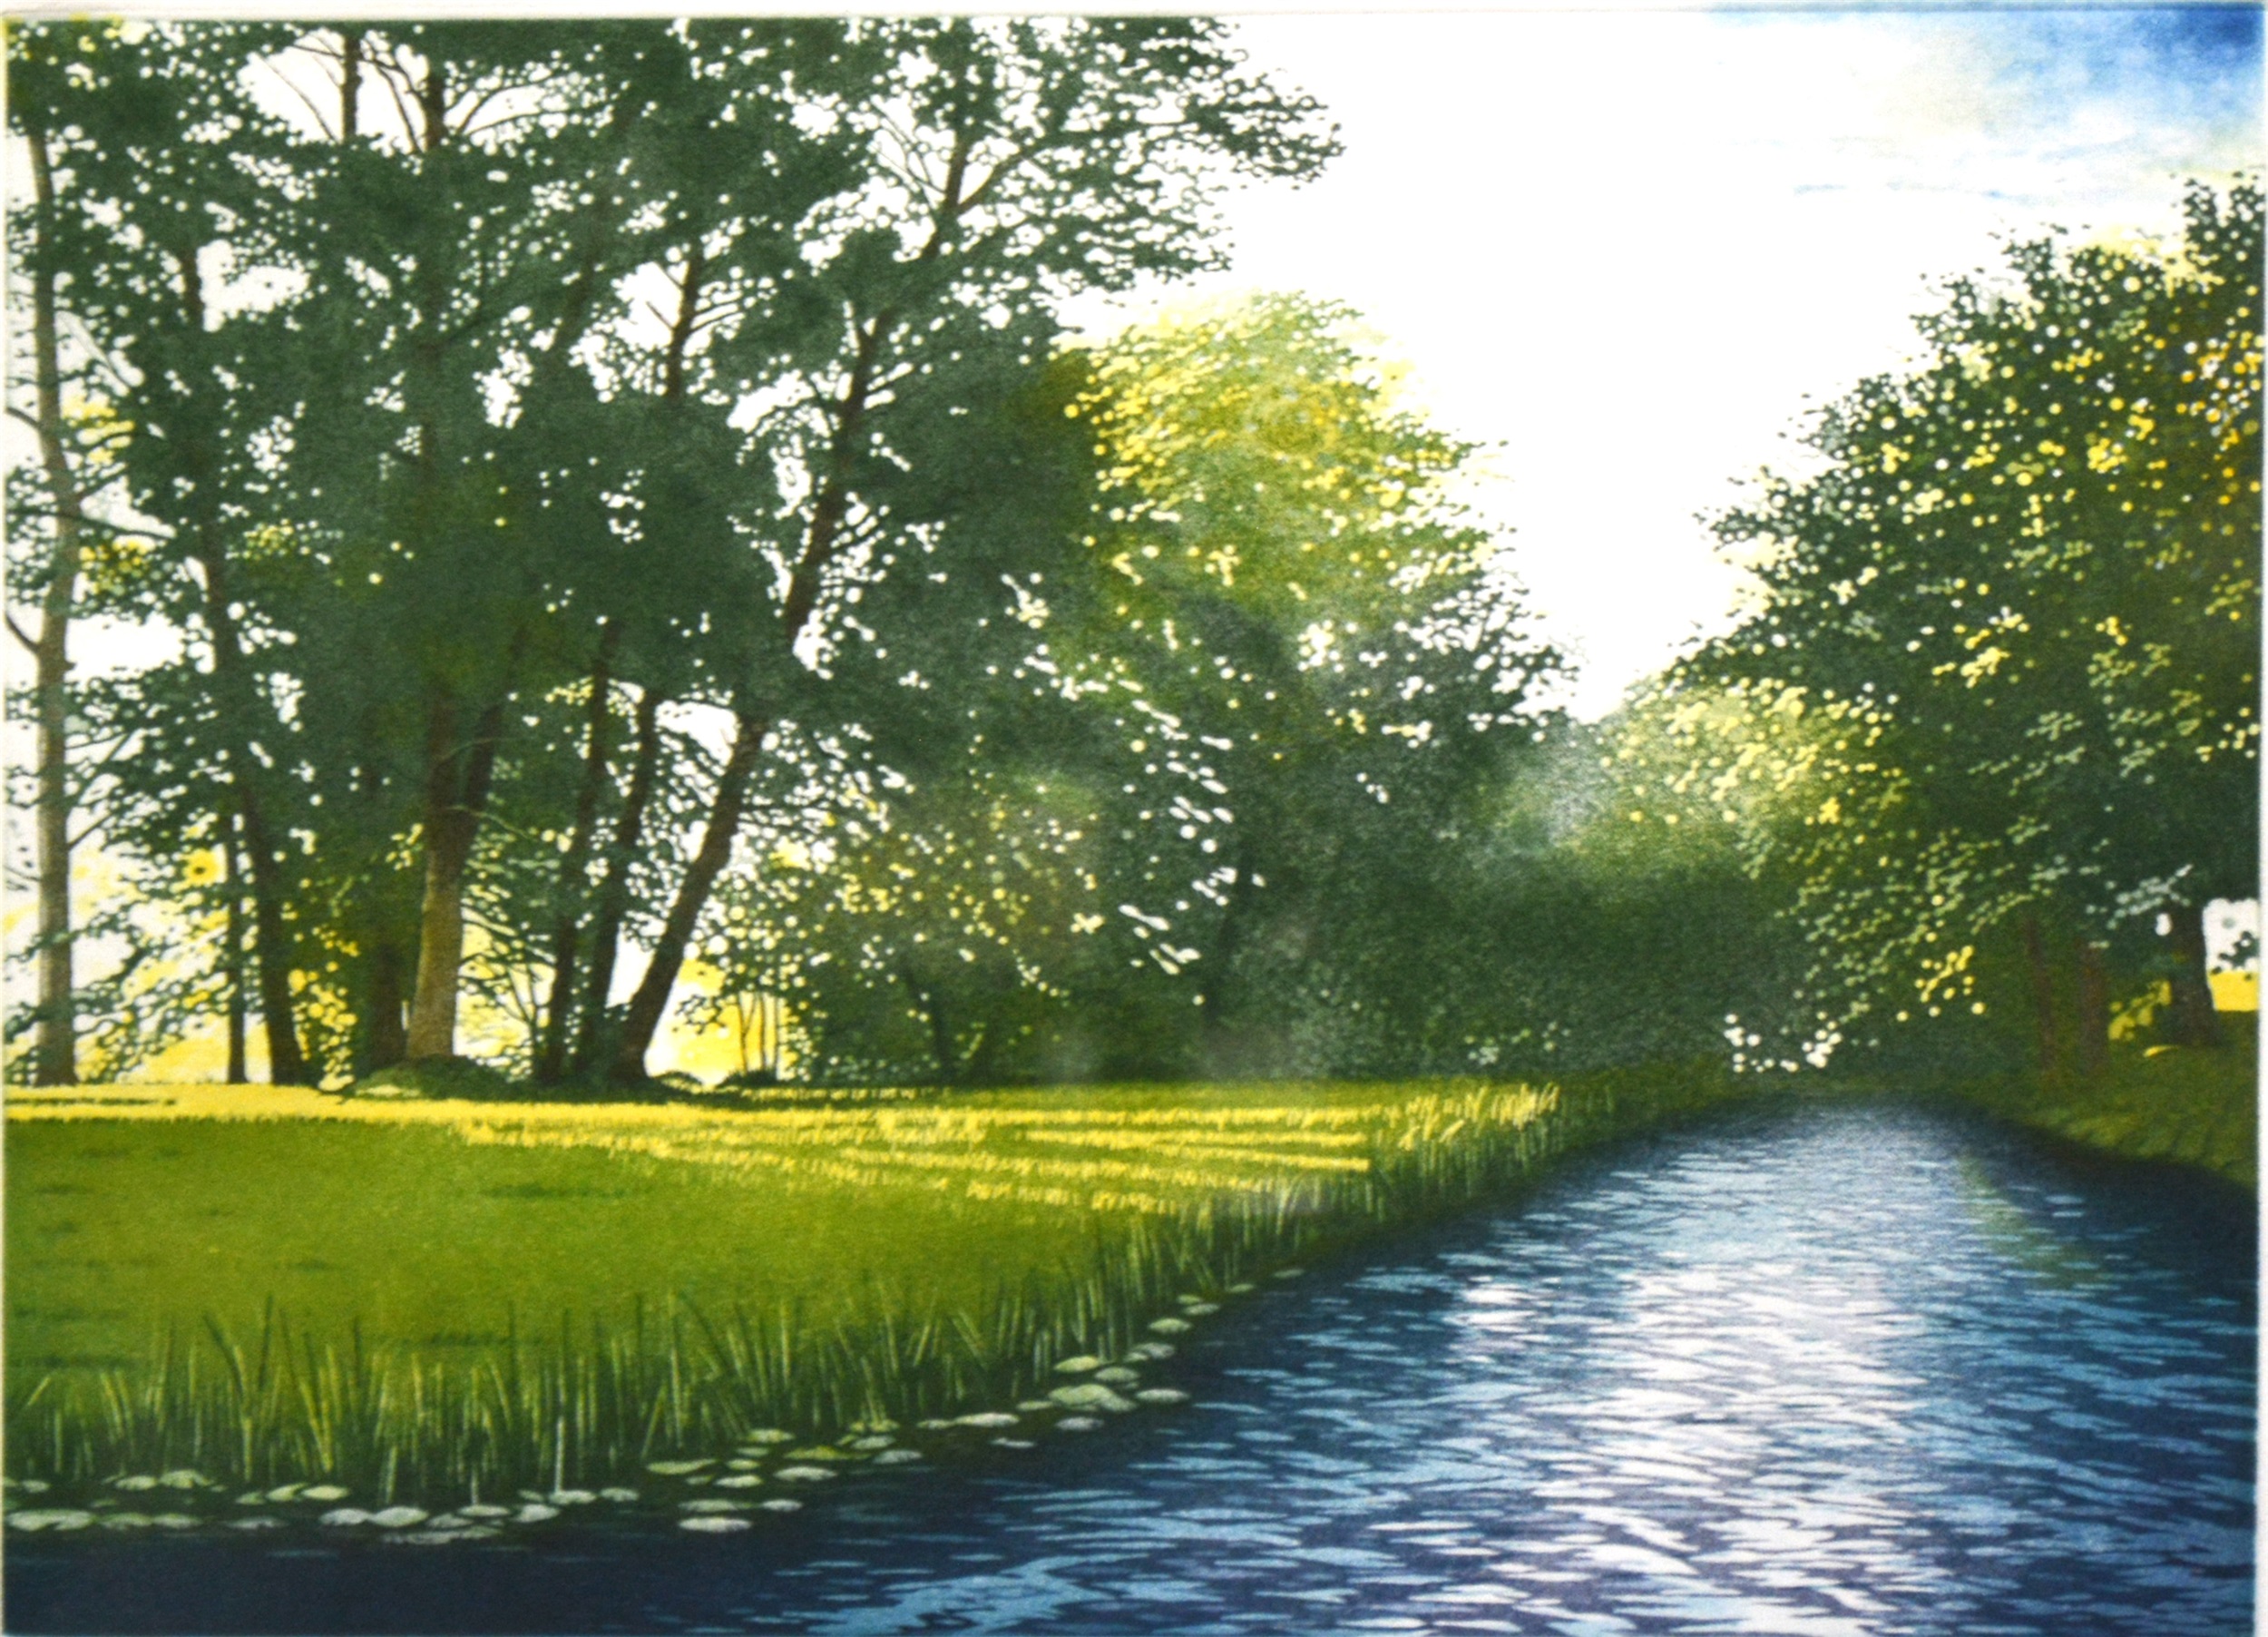 Christopher Penny, "Grand Union Canal, Marsworth" and "The River Waveney"